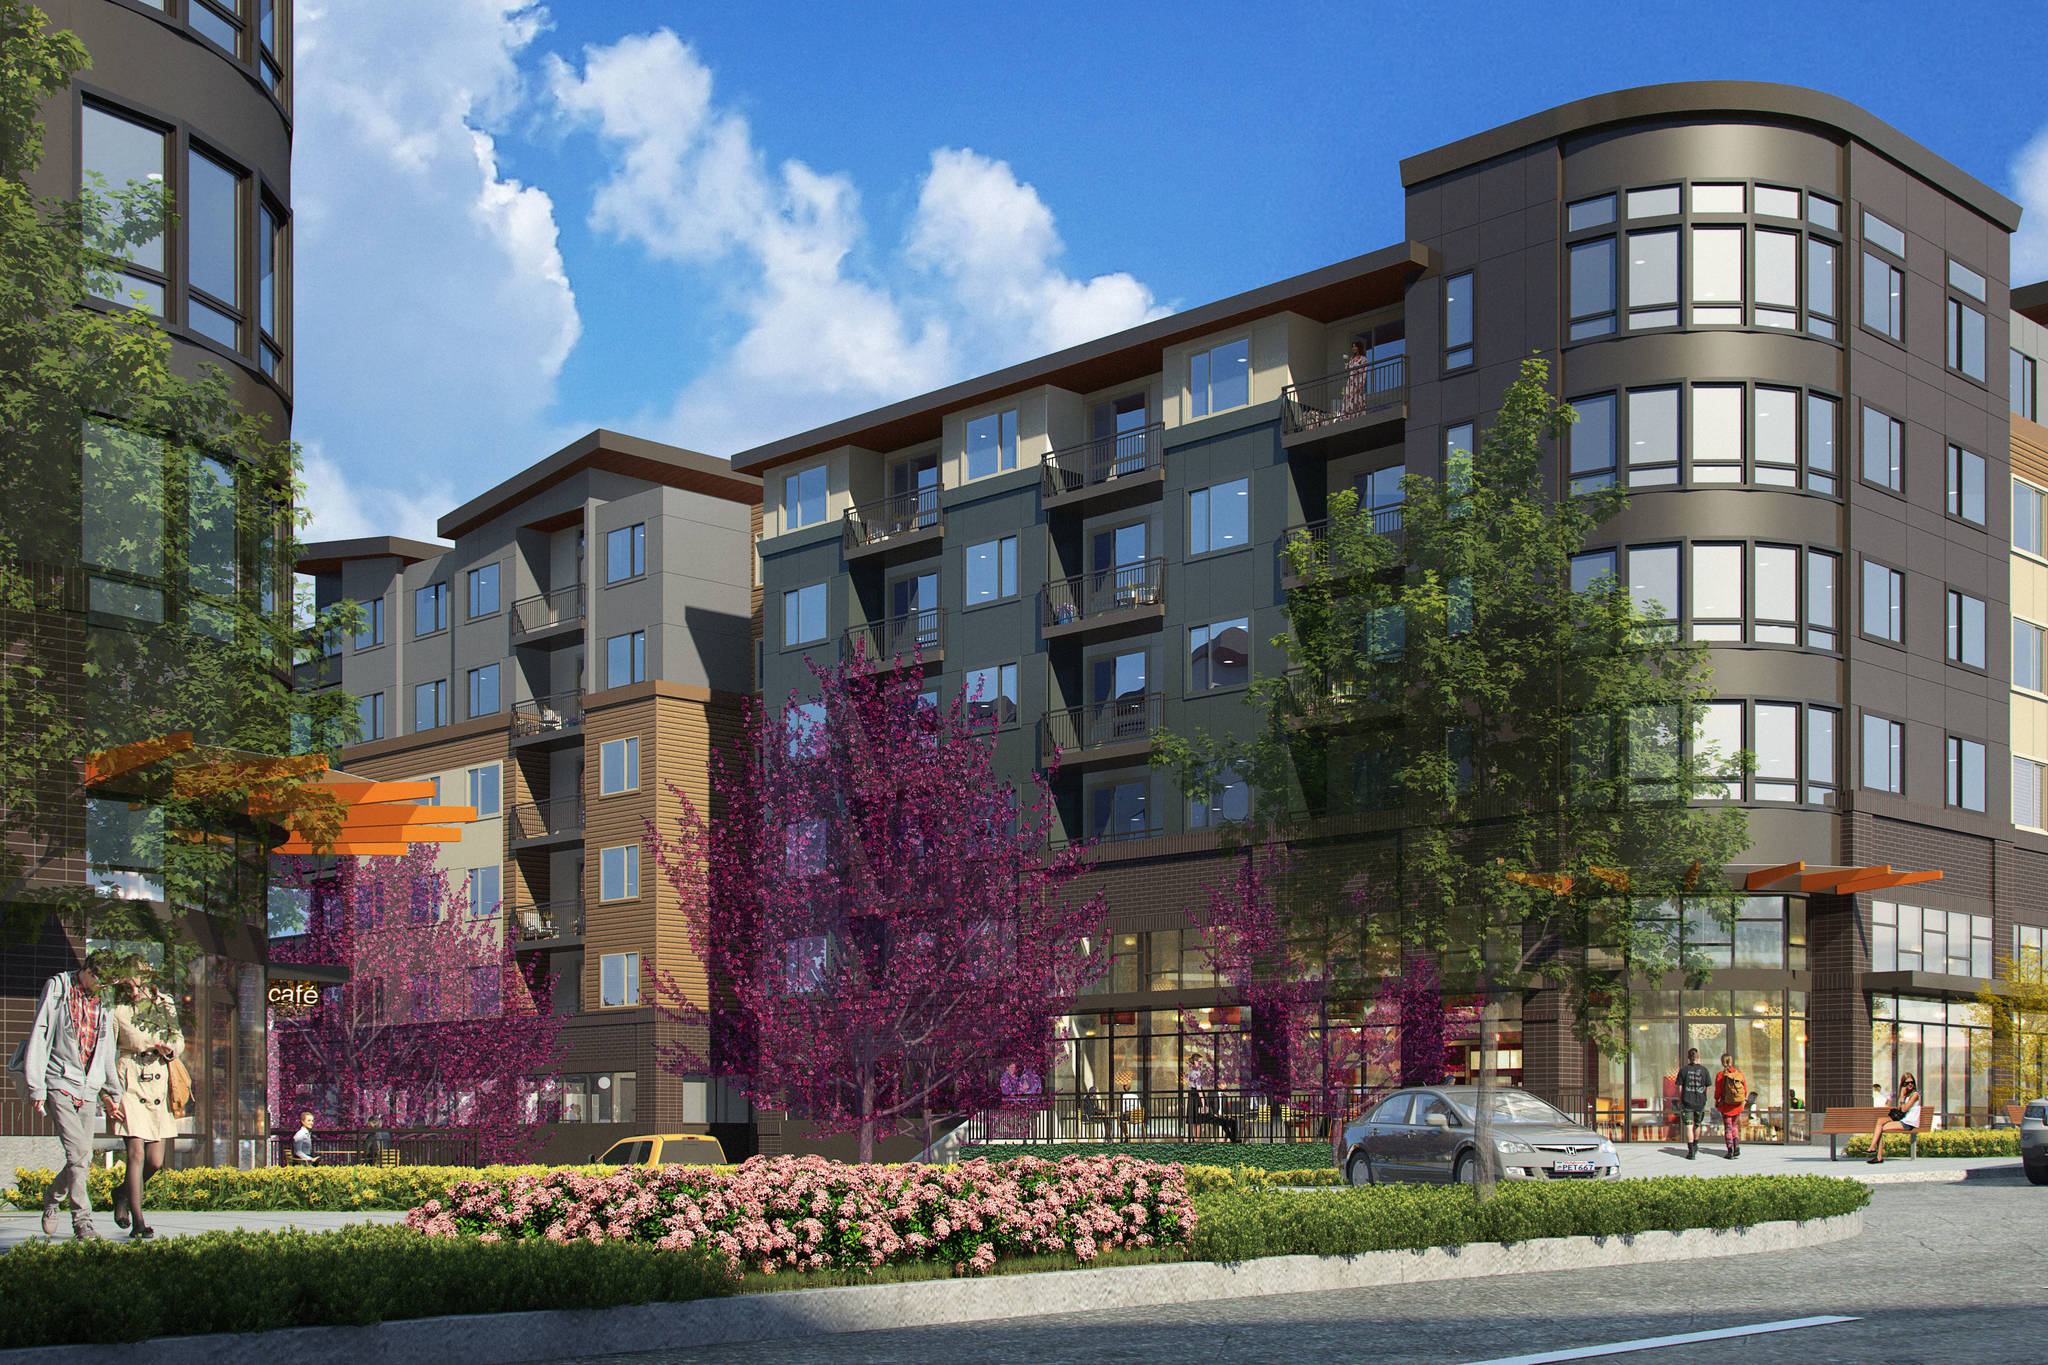 Artist renderings of the Solera complex (courtesy of Pacific Public Affairs)